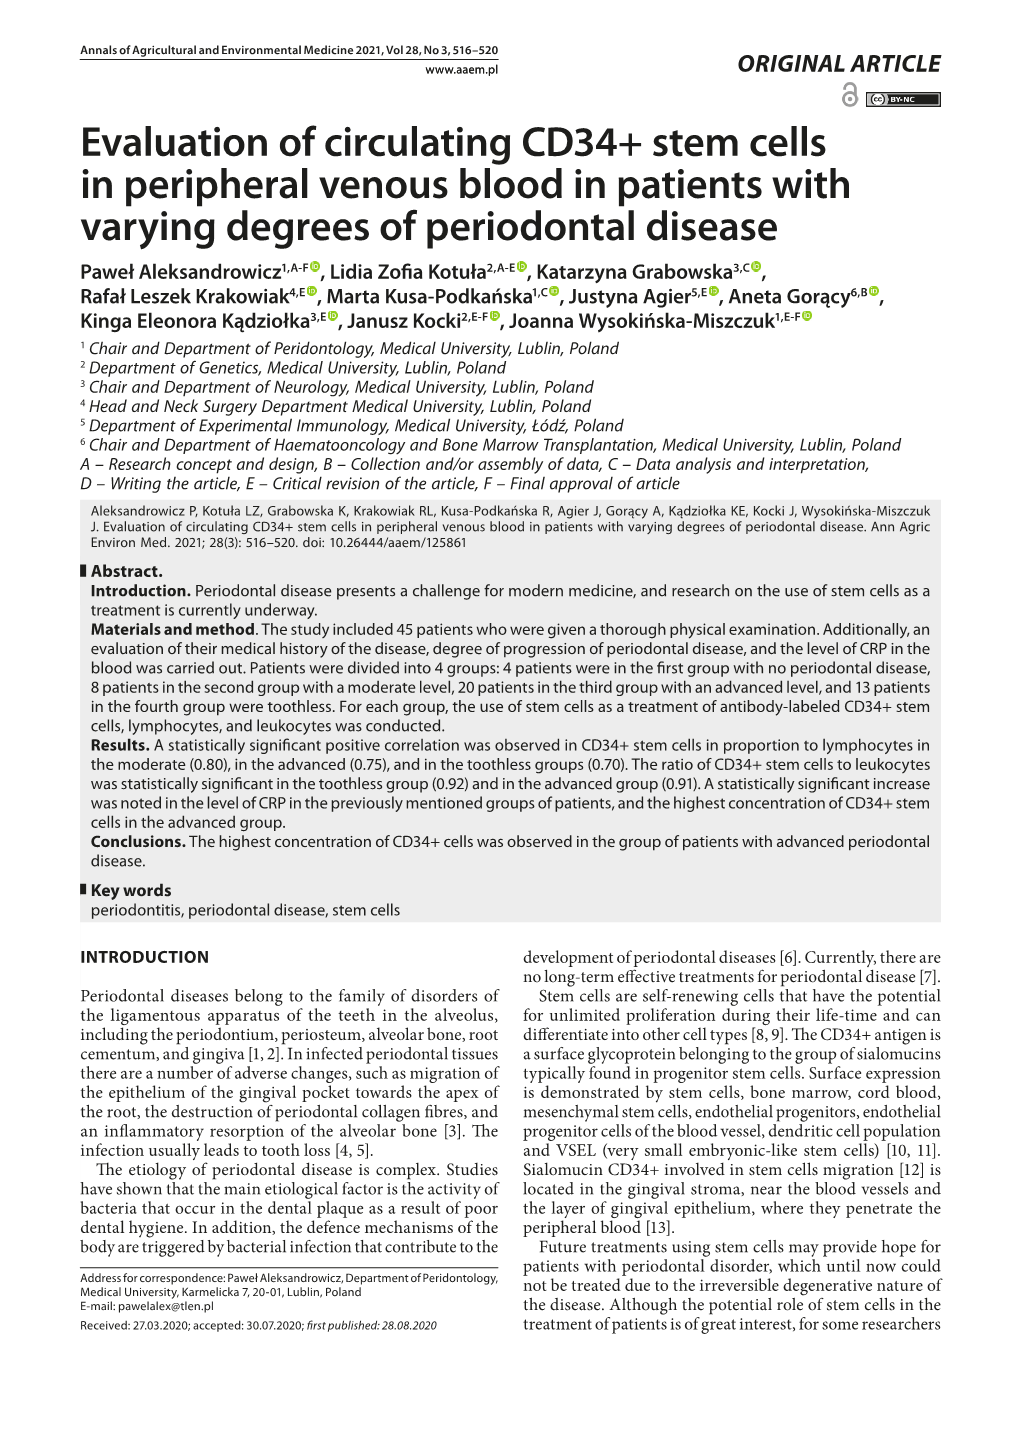 Evaluation of Circulating CD34+ Stem Cells in Peripheral Venous Blood in Patients with Varying Degrees of Periodontal Disease